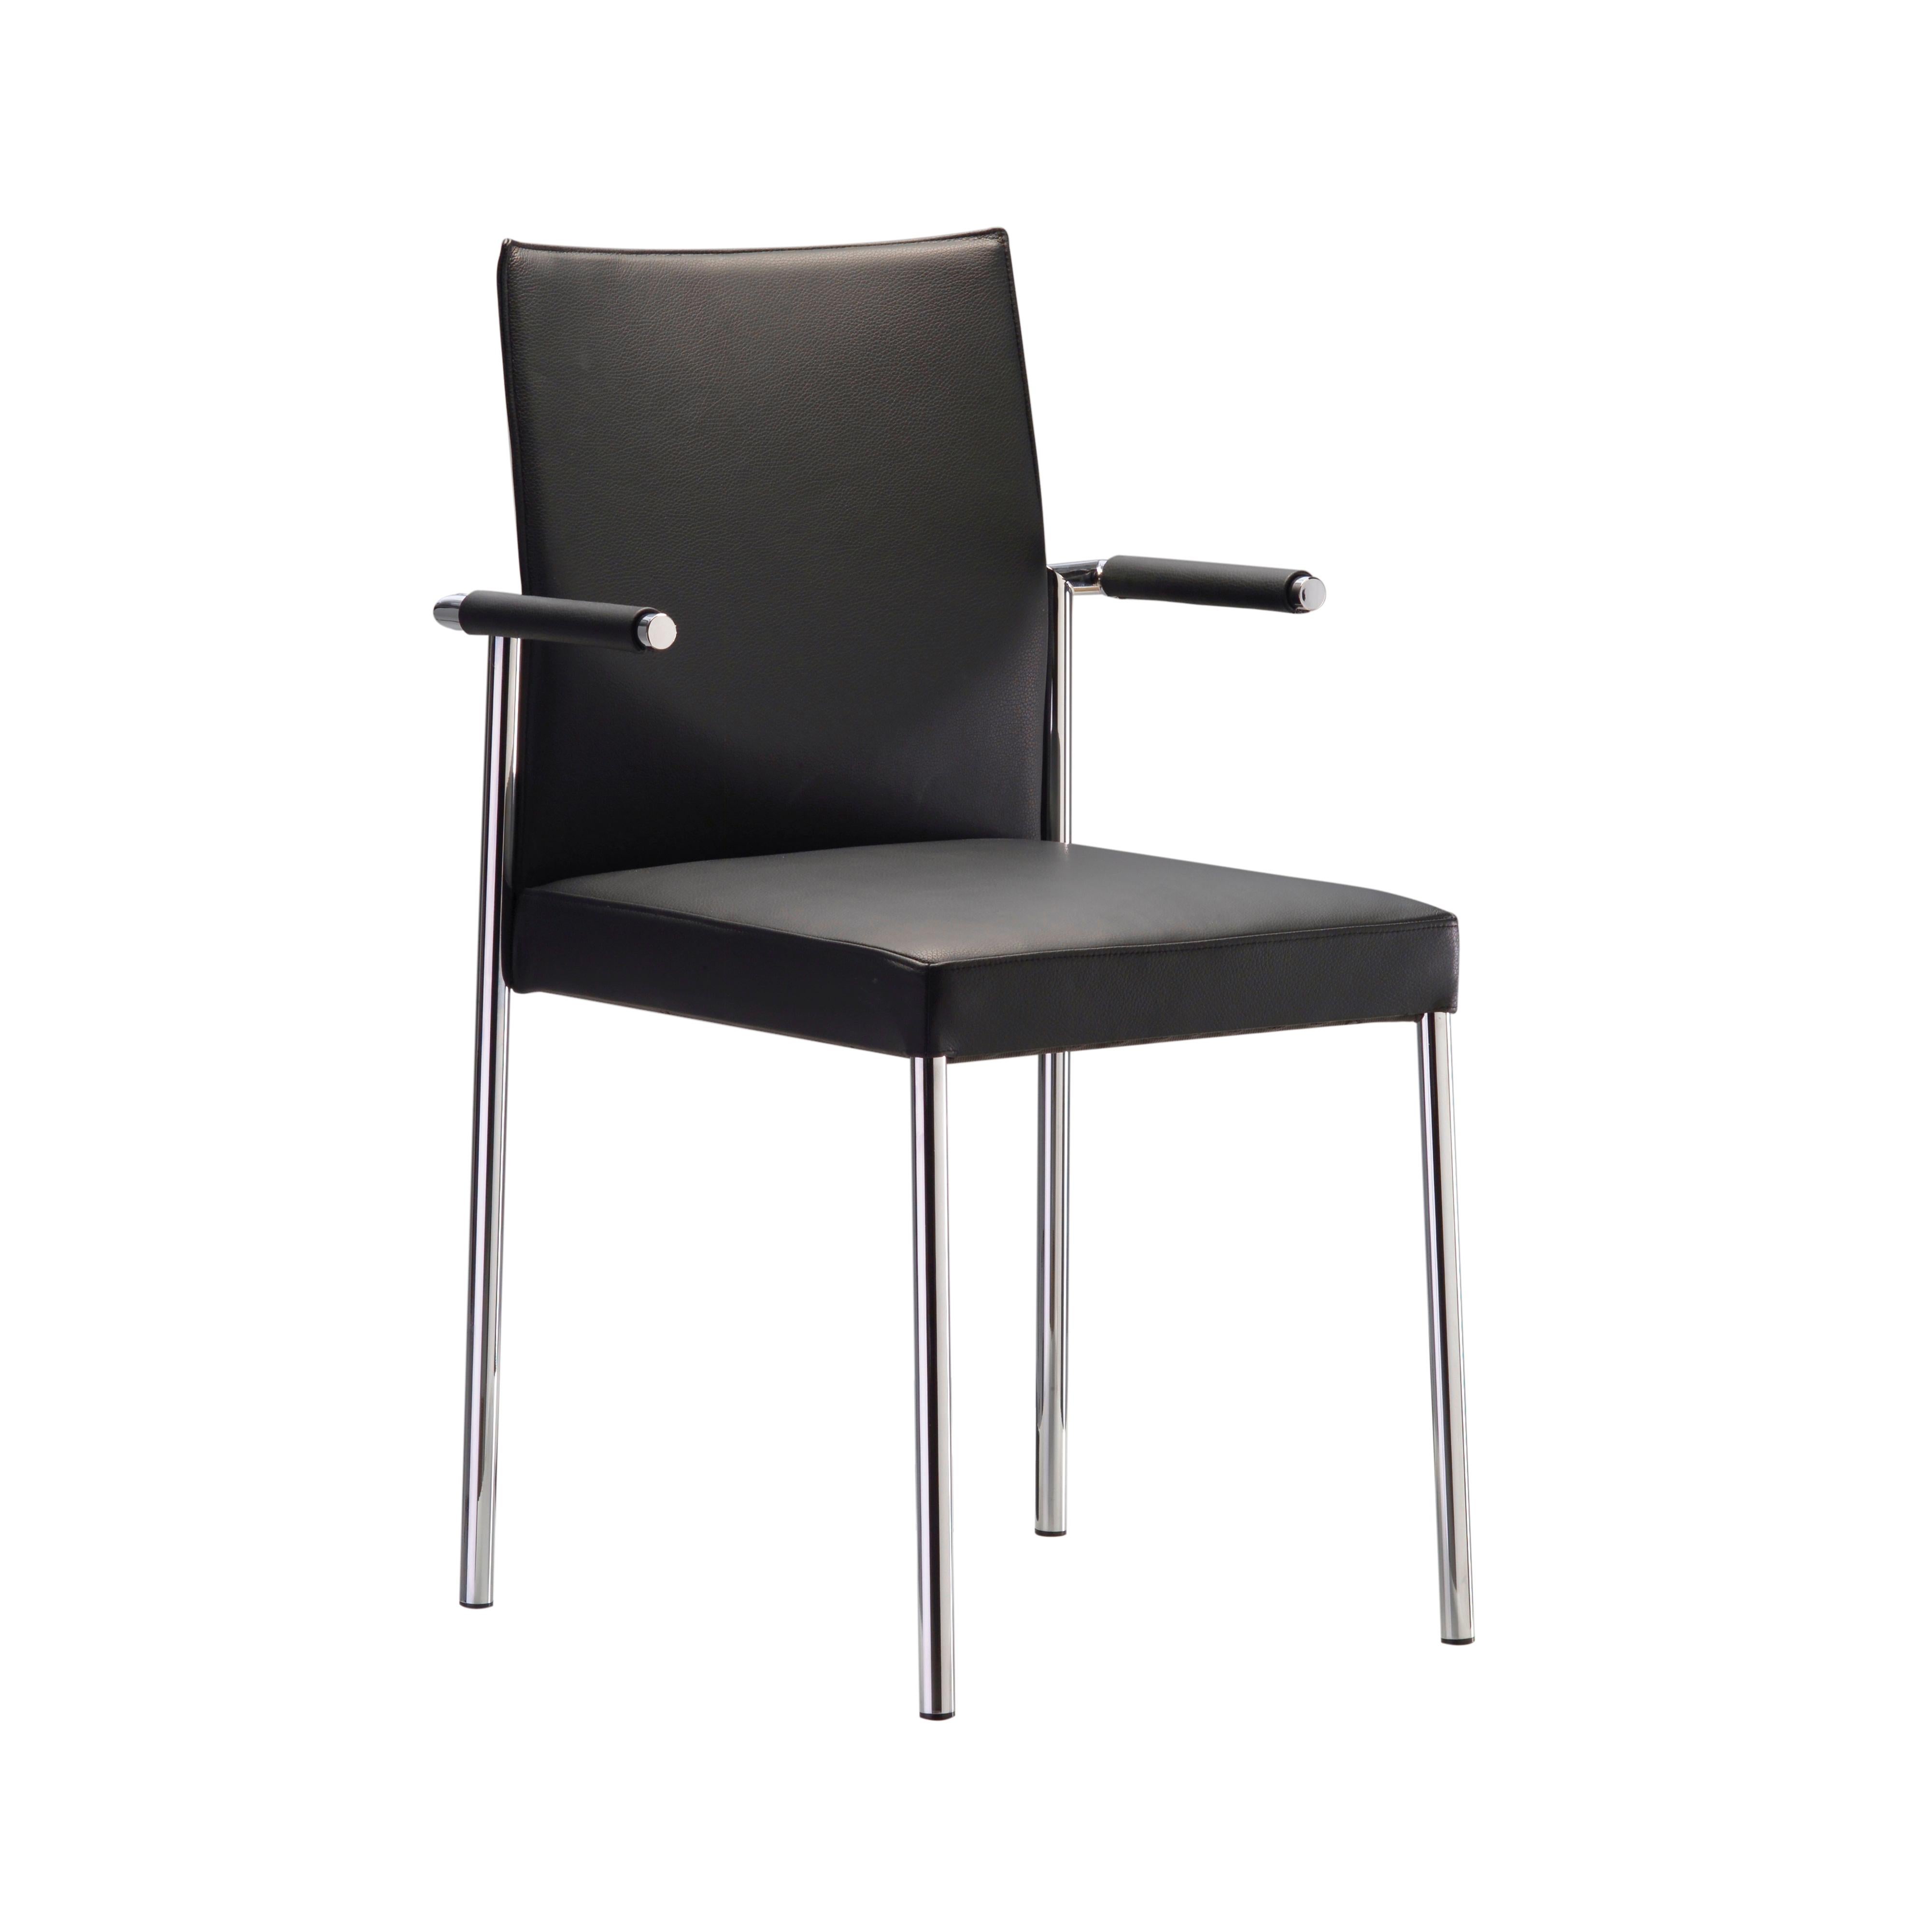 GLOOH Chair with Armrests in Black Leather by KFF